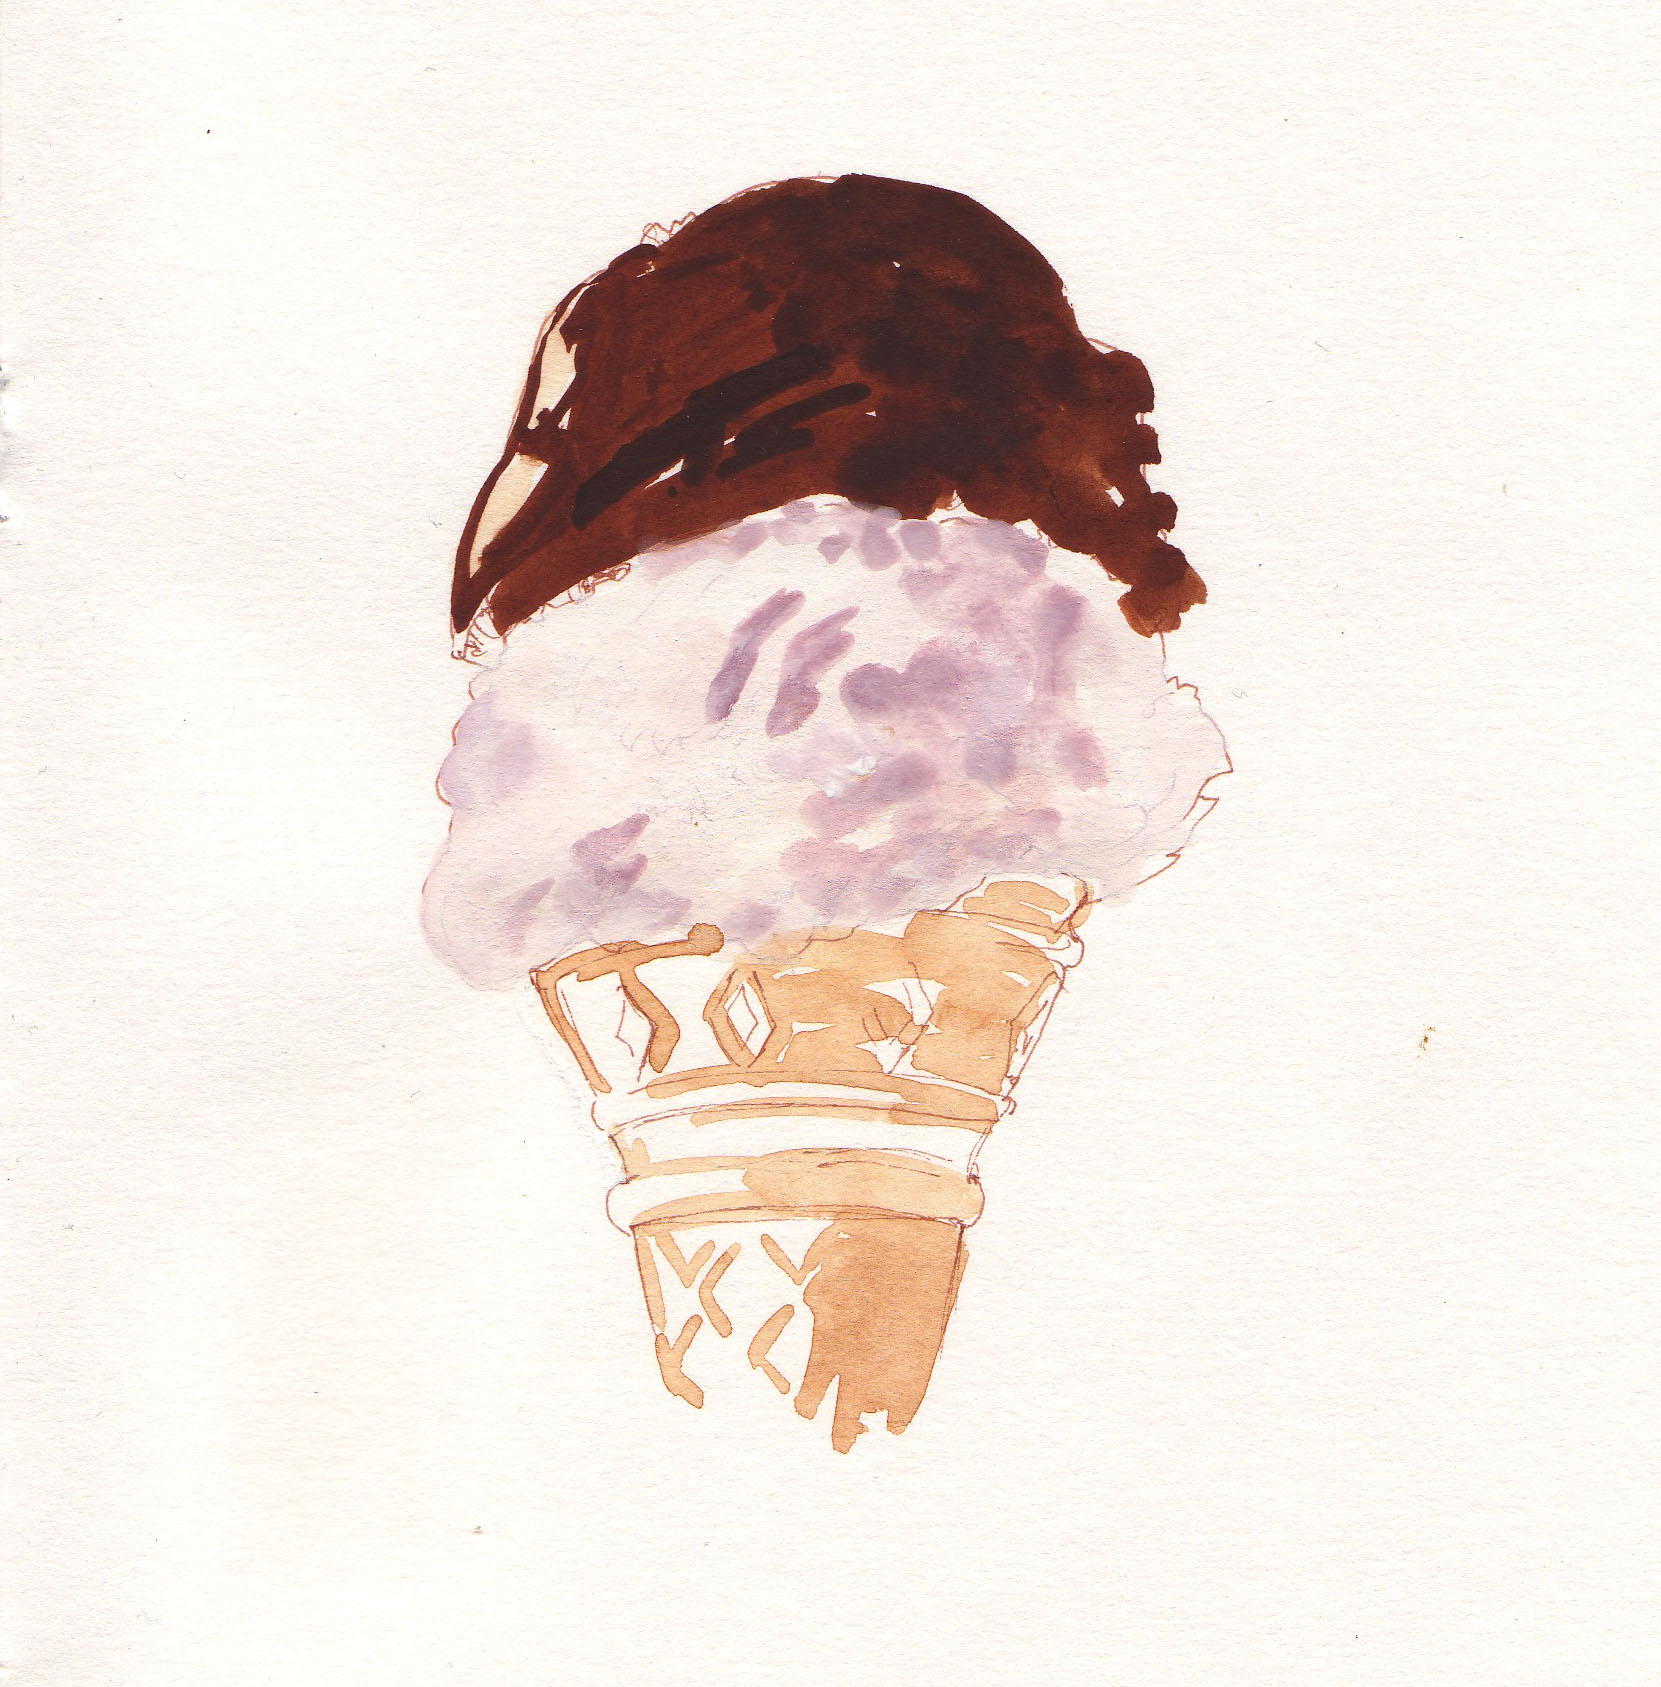 this is an art image of an ice cream cone with chocolate